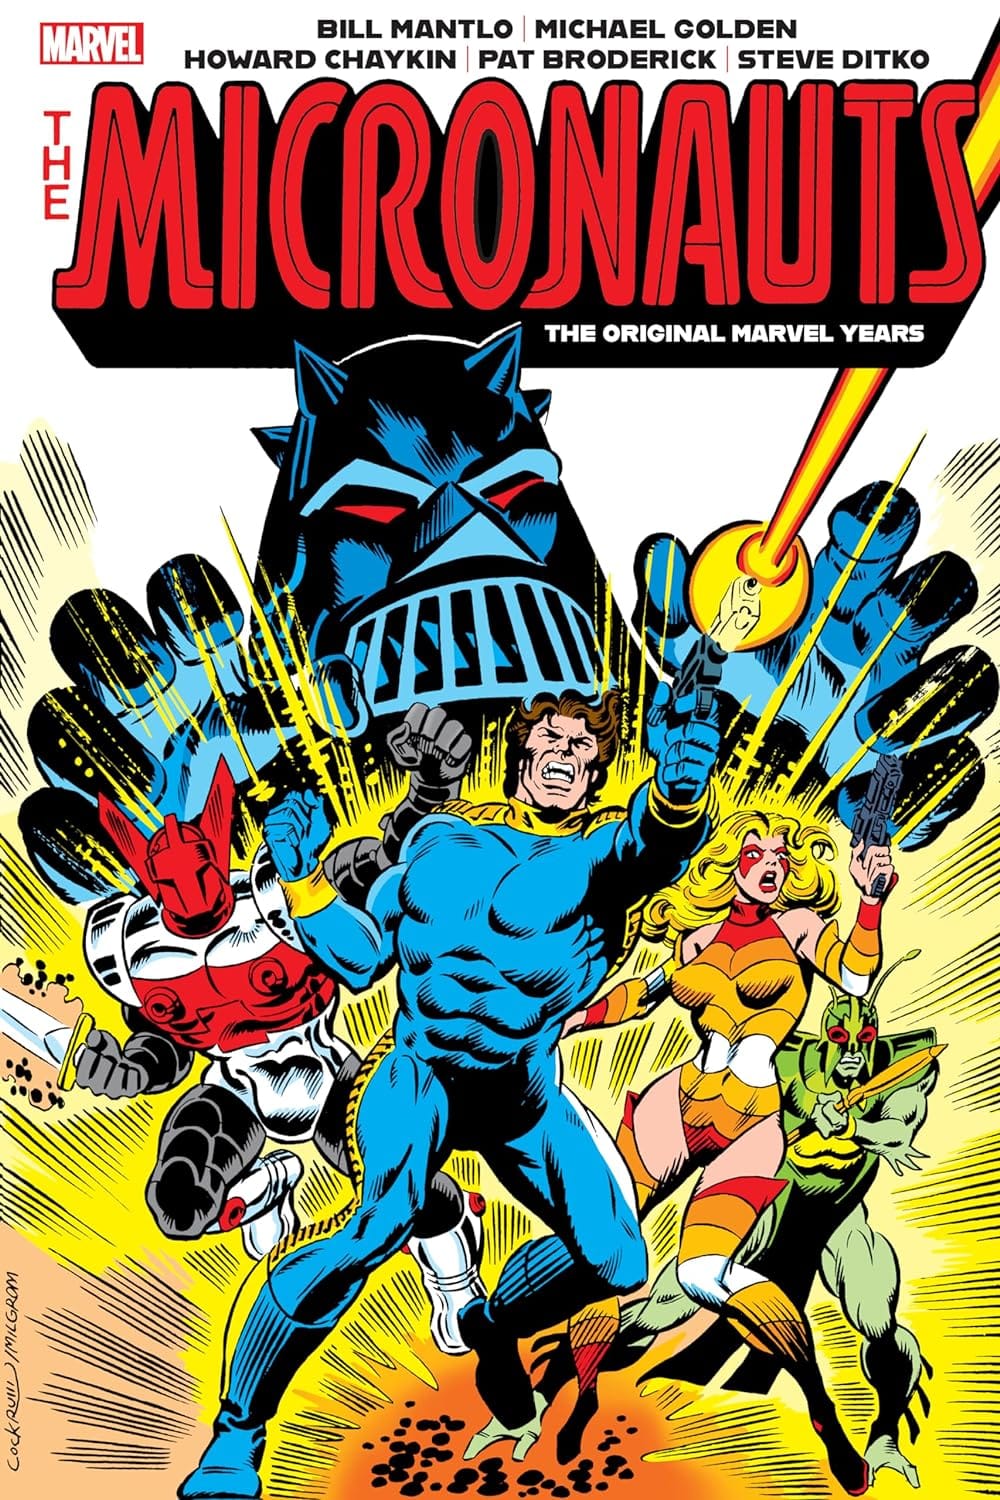 From the Archives: The Micronauts #1-12 by Bill Mantlo and Michael Golden